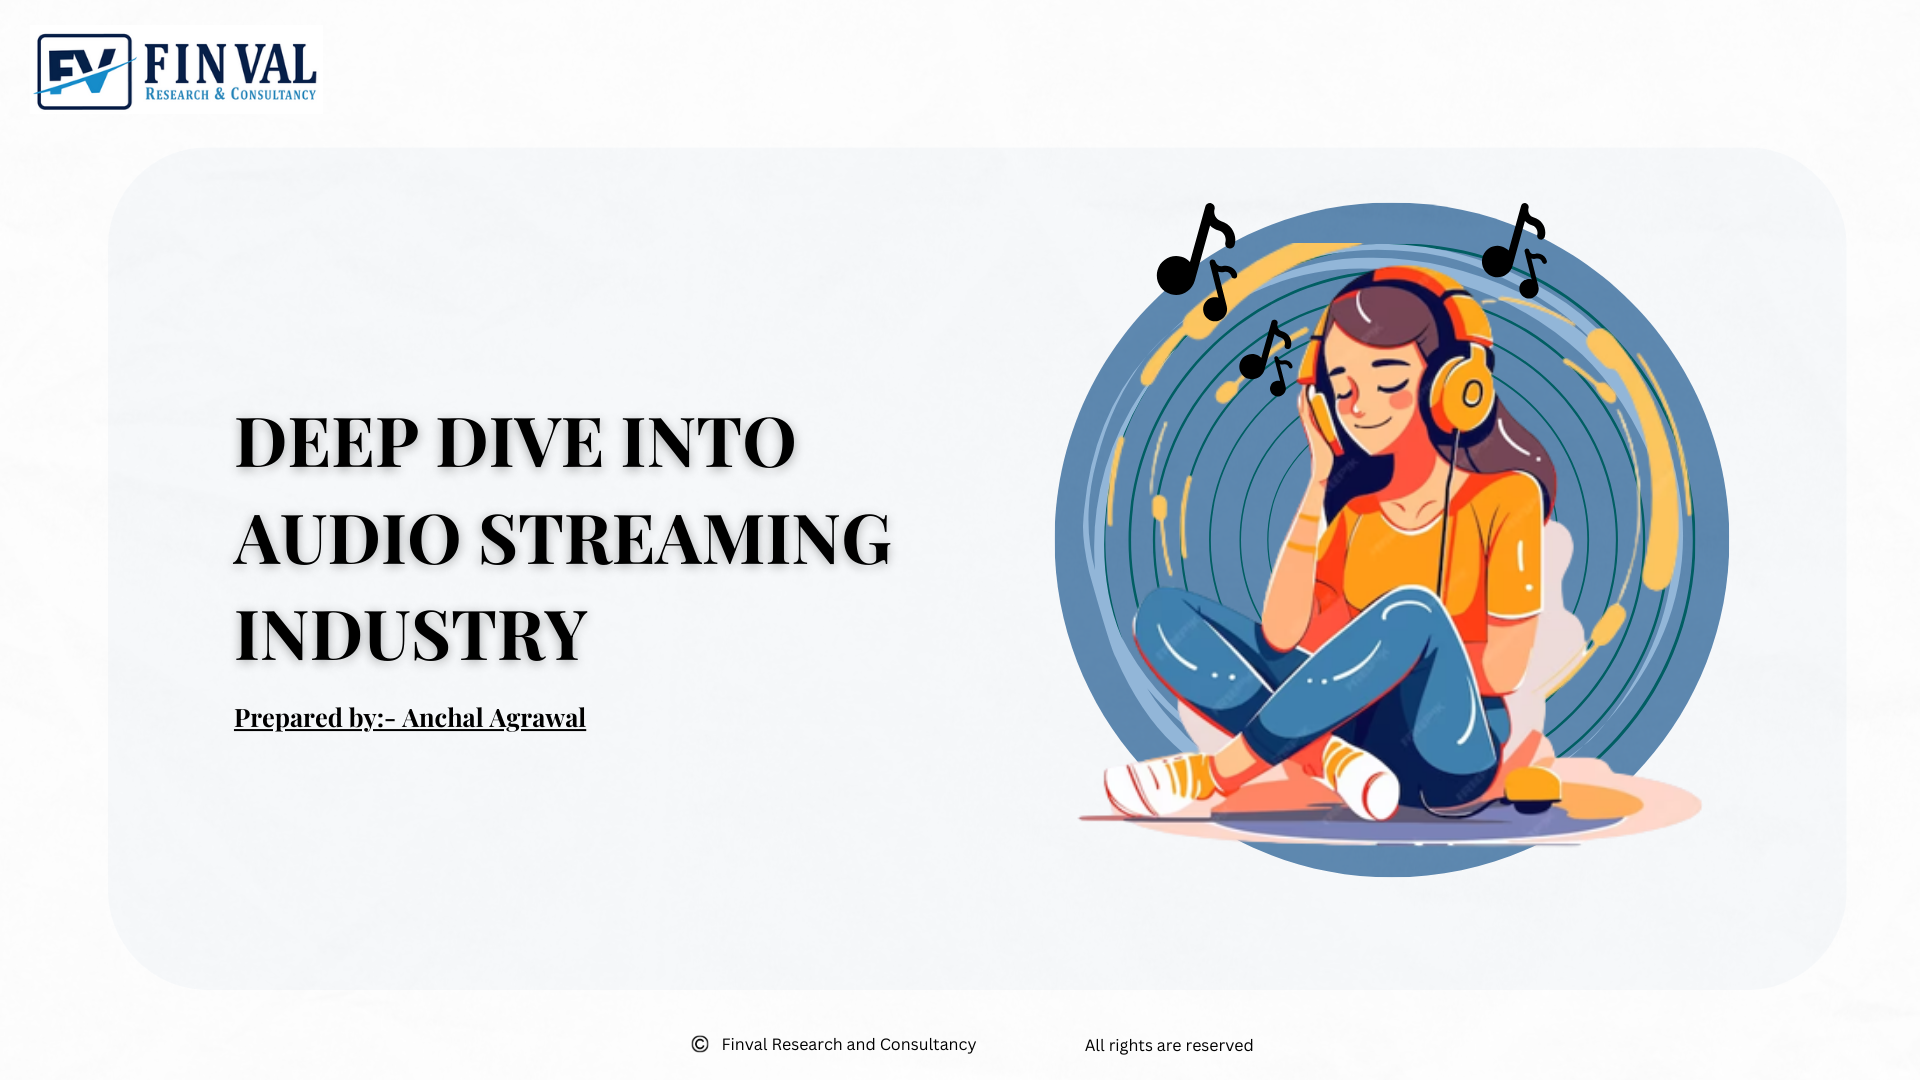 DEEP DIVE INTO AUDIO STREAMING INDUSTRY